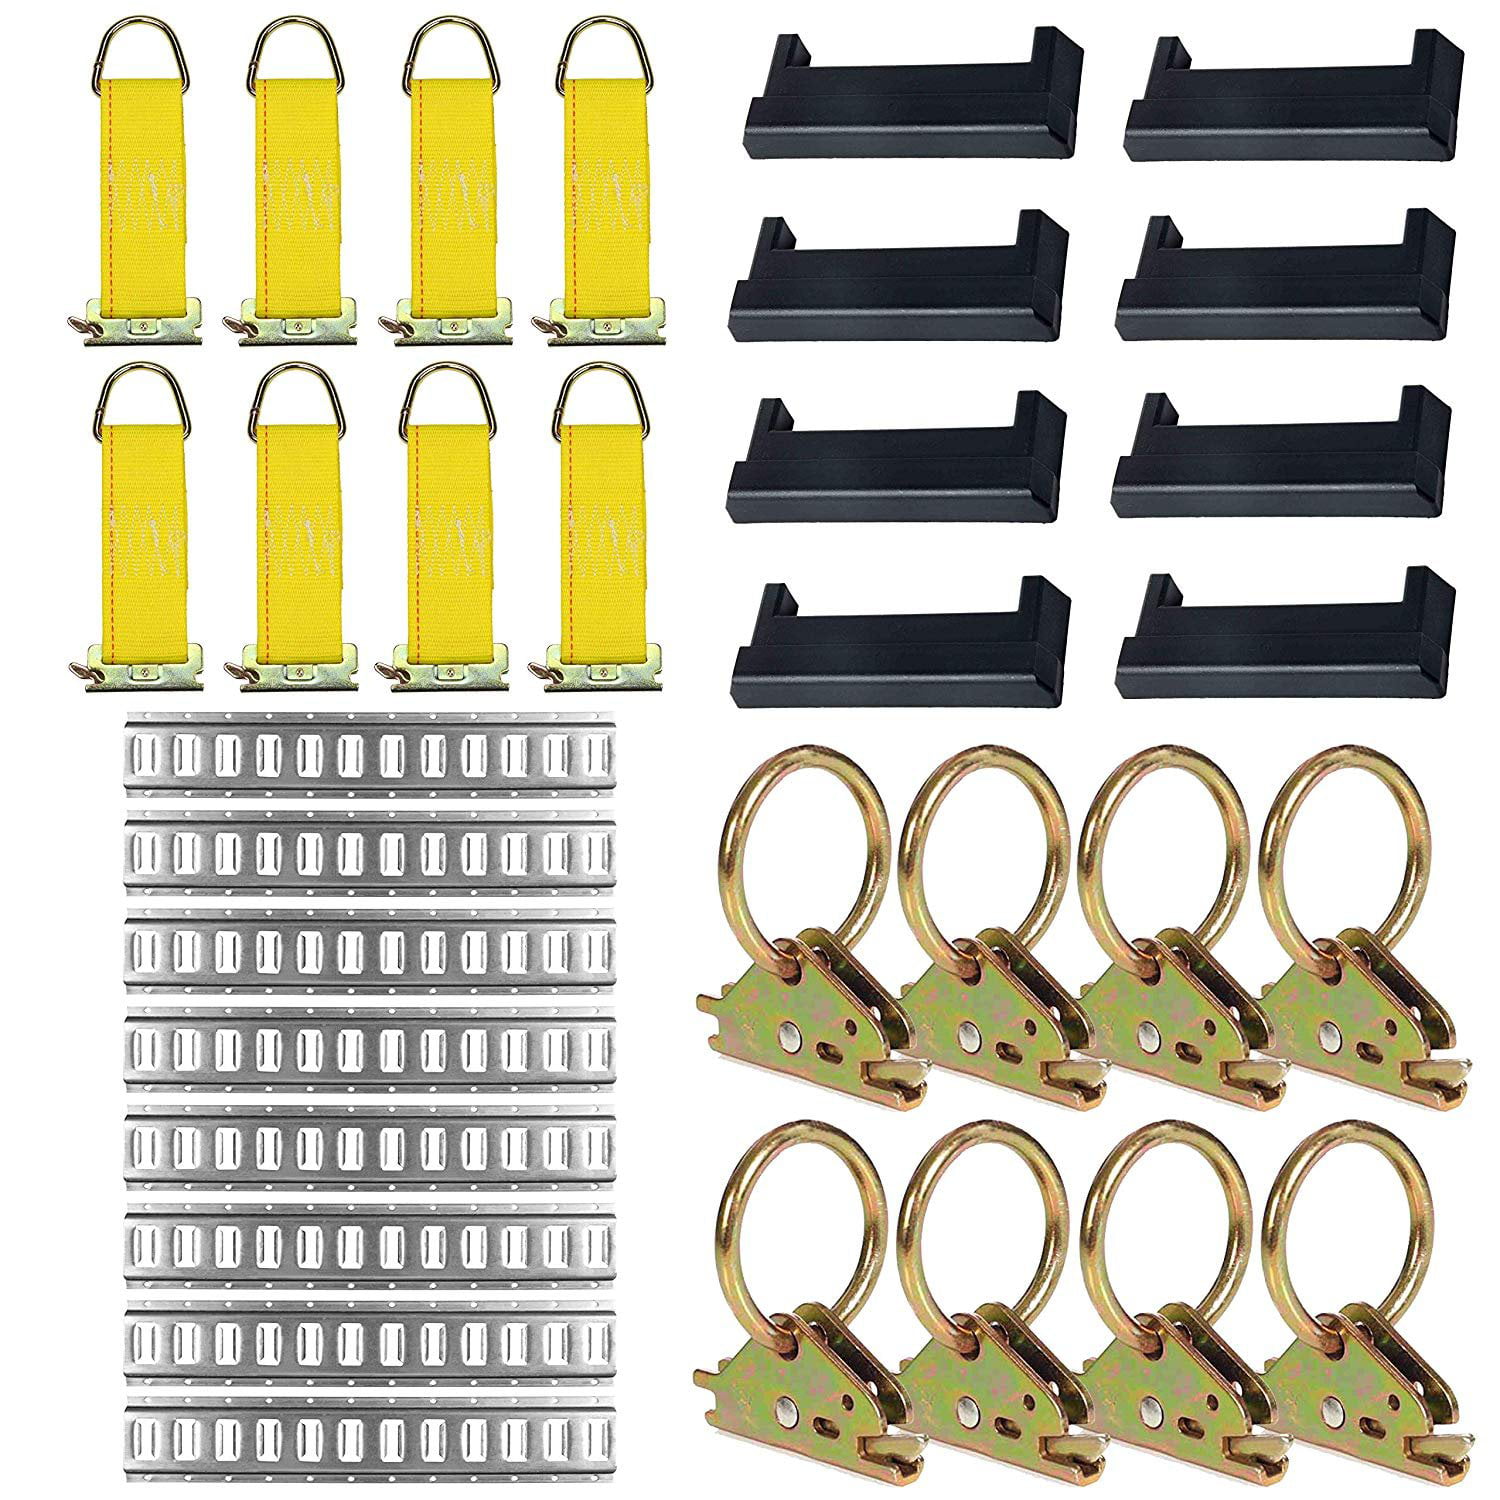 SGT KNOTS Tiedown Rail ETrack Accessories Load Securement in Box Truck E Track Thumb Release O Ring Tie Down Anchors for ETrack Cargo Straps 1 in Ring - 4 Pack Heavy Duty E-Track Clip 